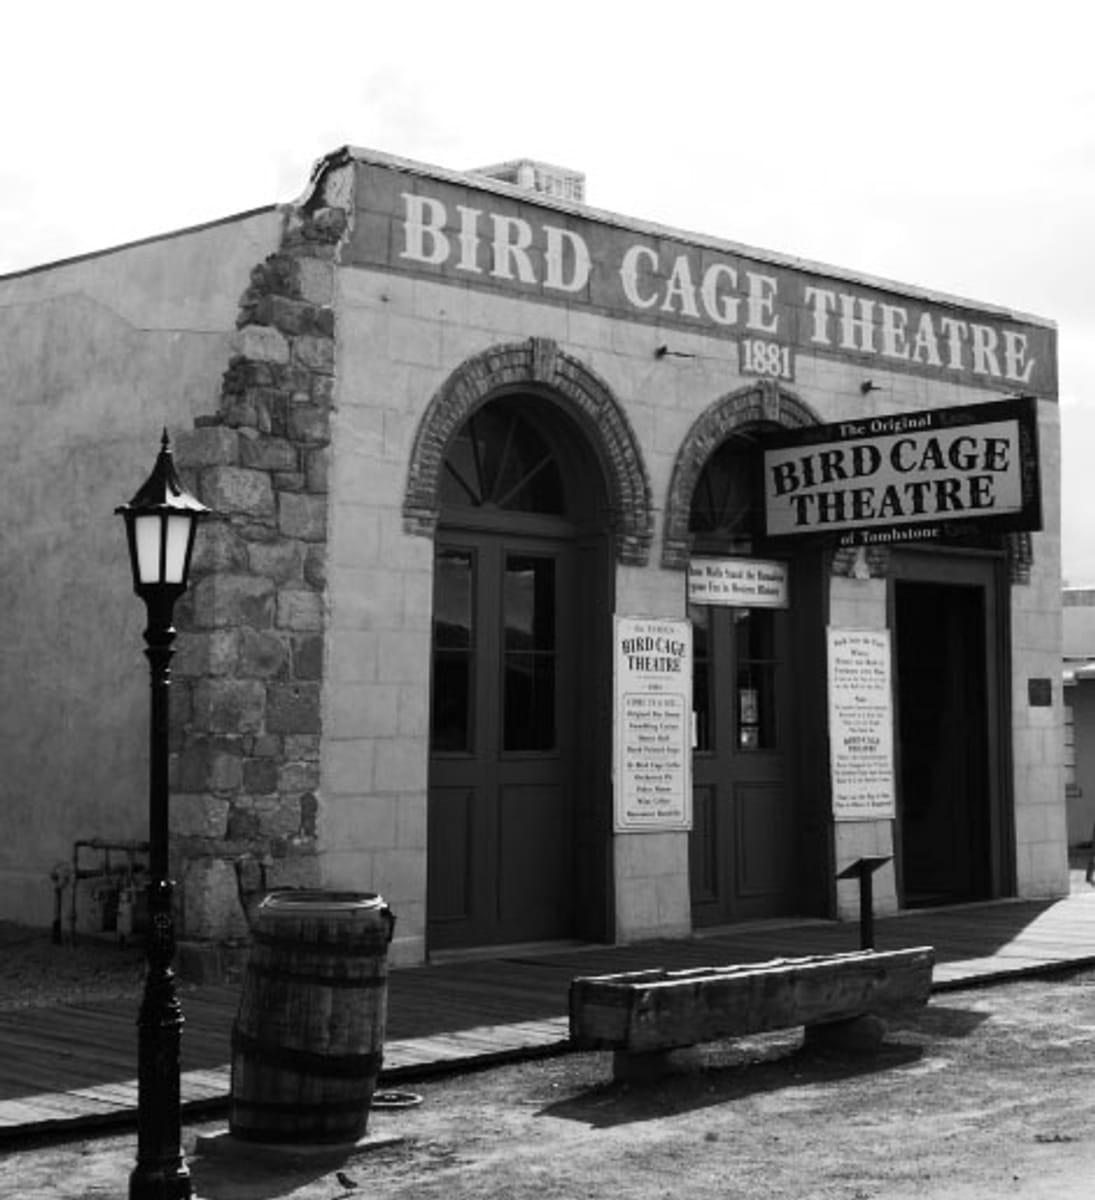 The Bird Cage Theatre is an old west staple, and rumored to be haunted